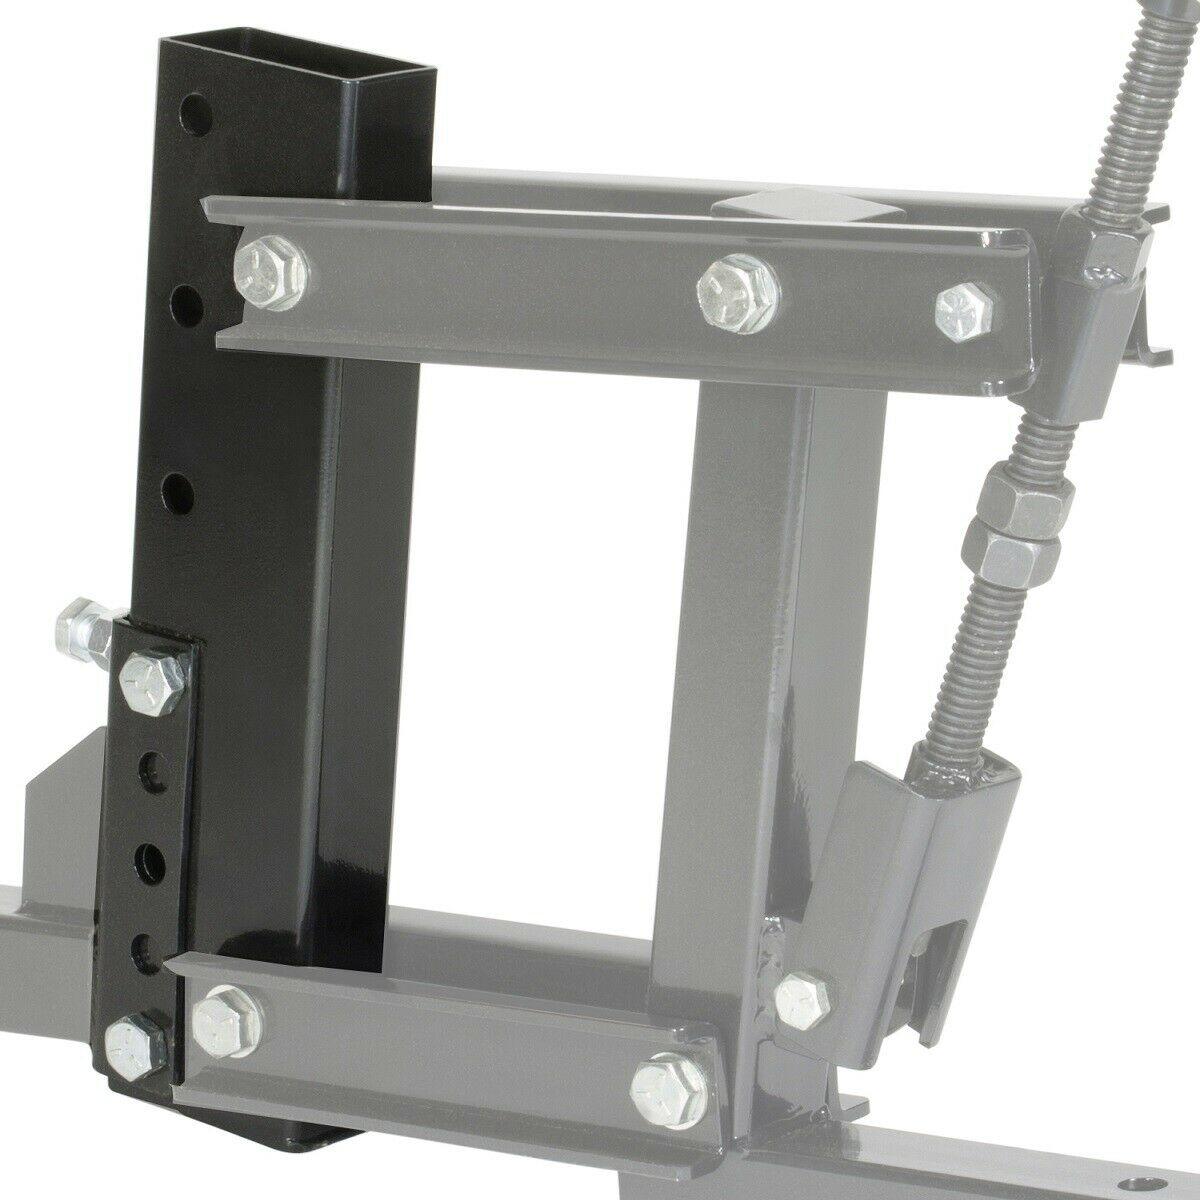 Impact Implements Pro 1-Point Lift System for ATV/UTV with 2 inch Receivers - Moto Life Products